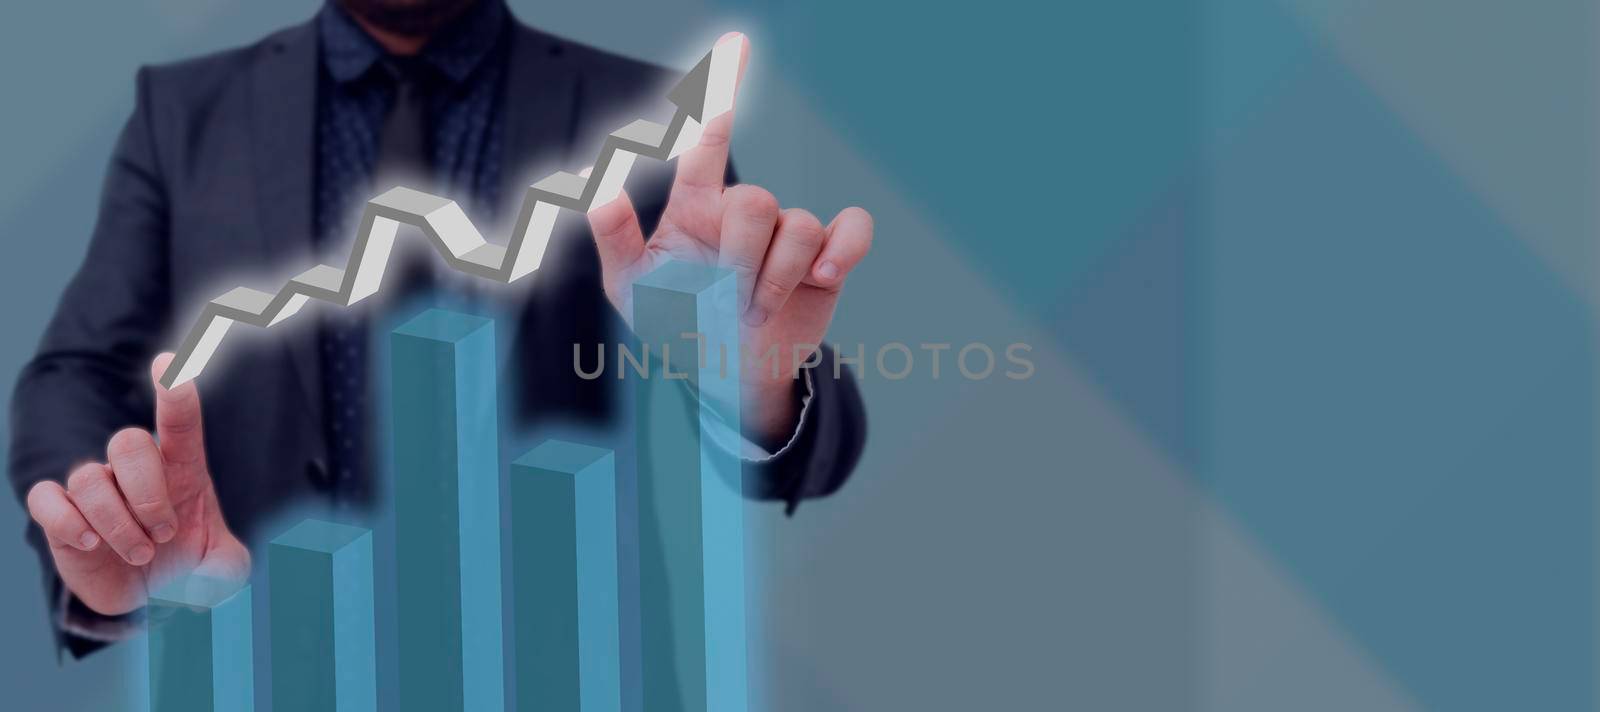 Man In A Suit Showing Crucial Data Charts And Growth In Business.